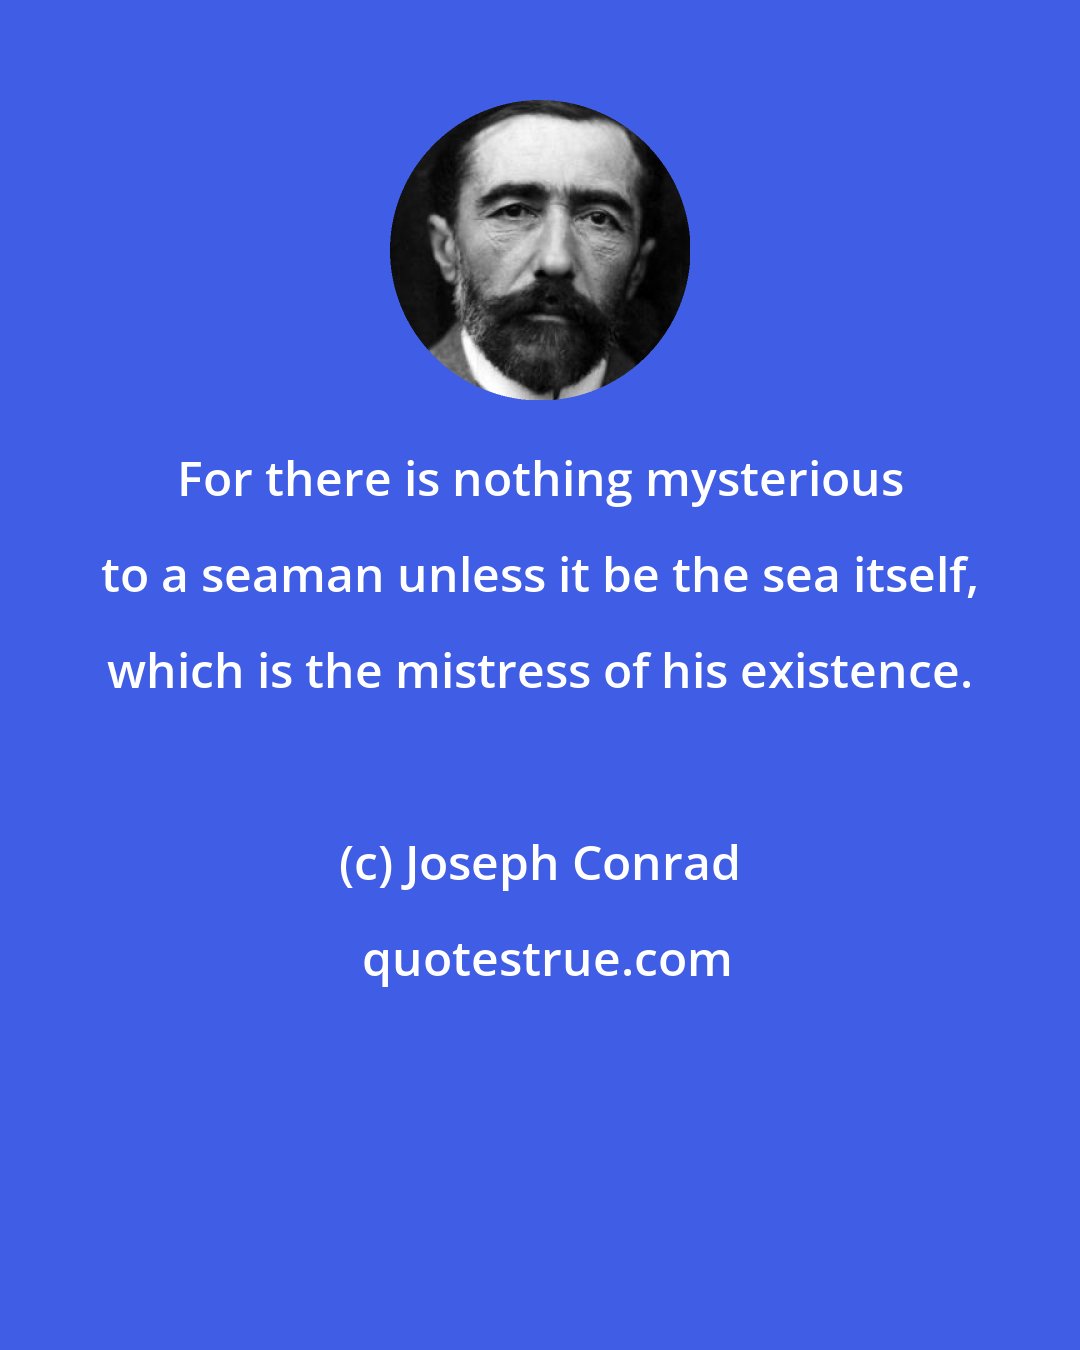 Joseph Conrad: For there is nothing mysterious to a seaman unless it be the sea itself, which is the mistress of his existence.